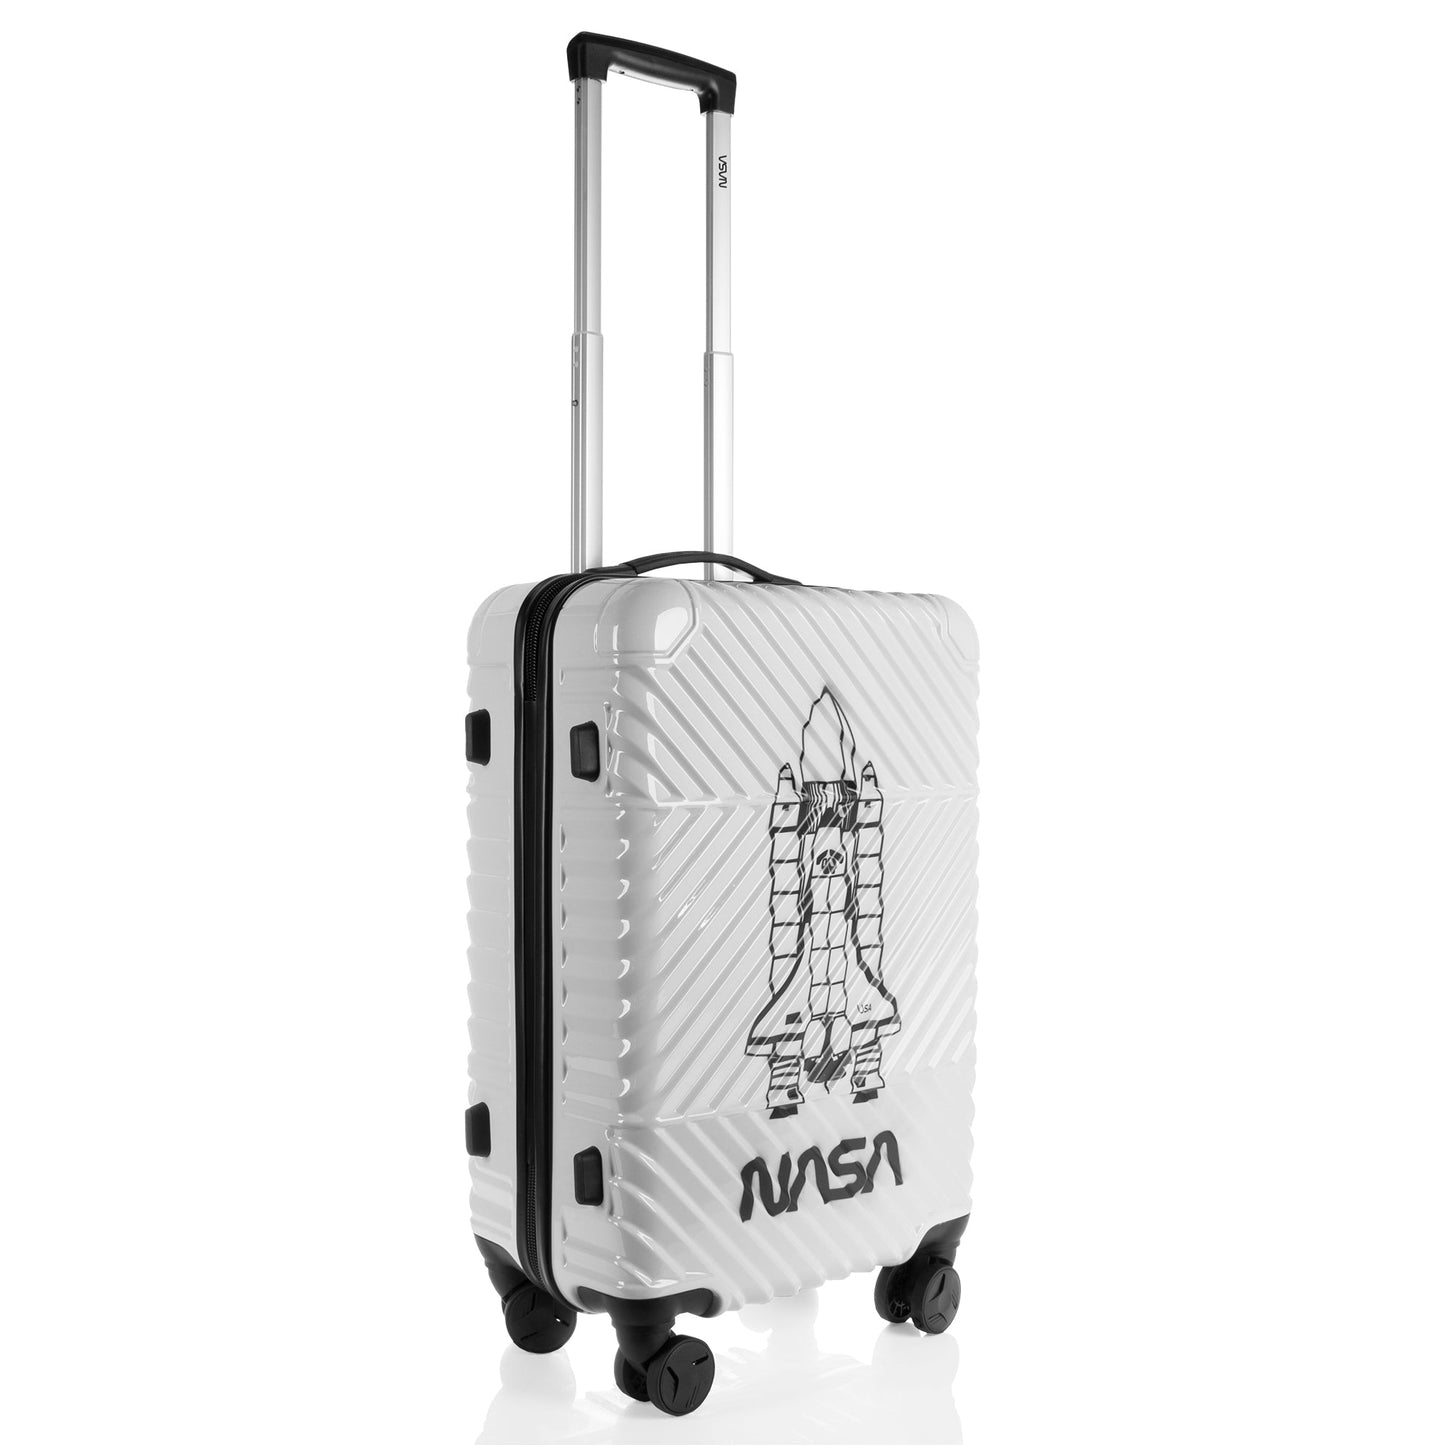 Space Shuttle Collection White Luggage 3 Piece Set (21/25/29") Suitcase Lock Spinner Hardshell